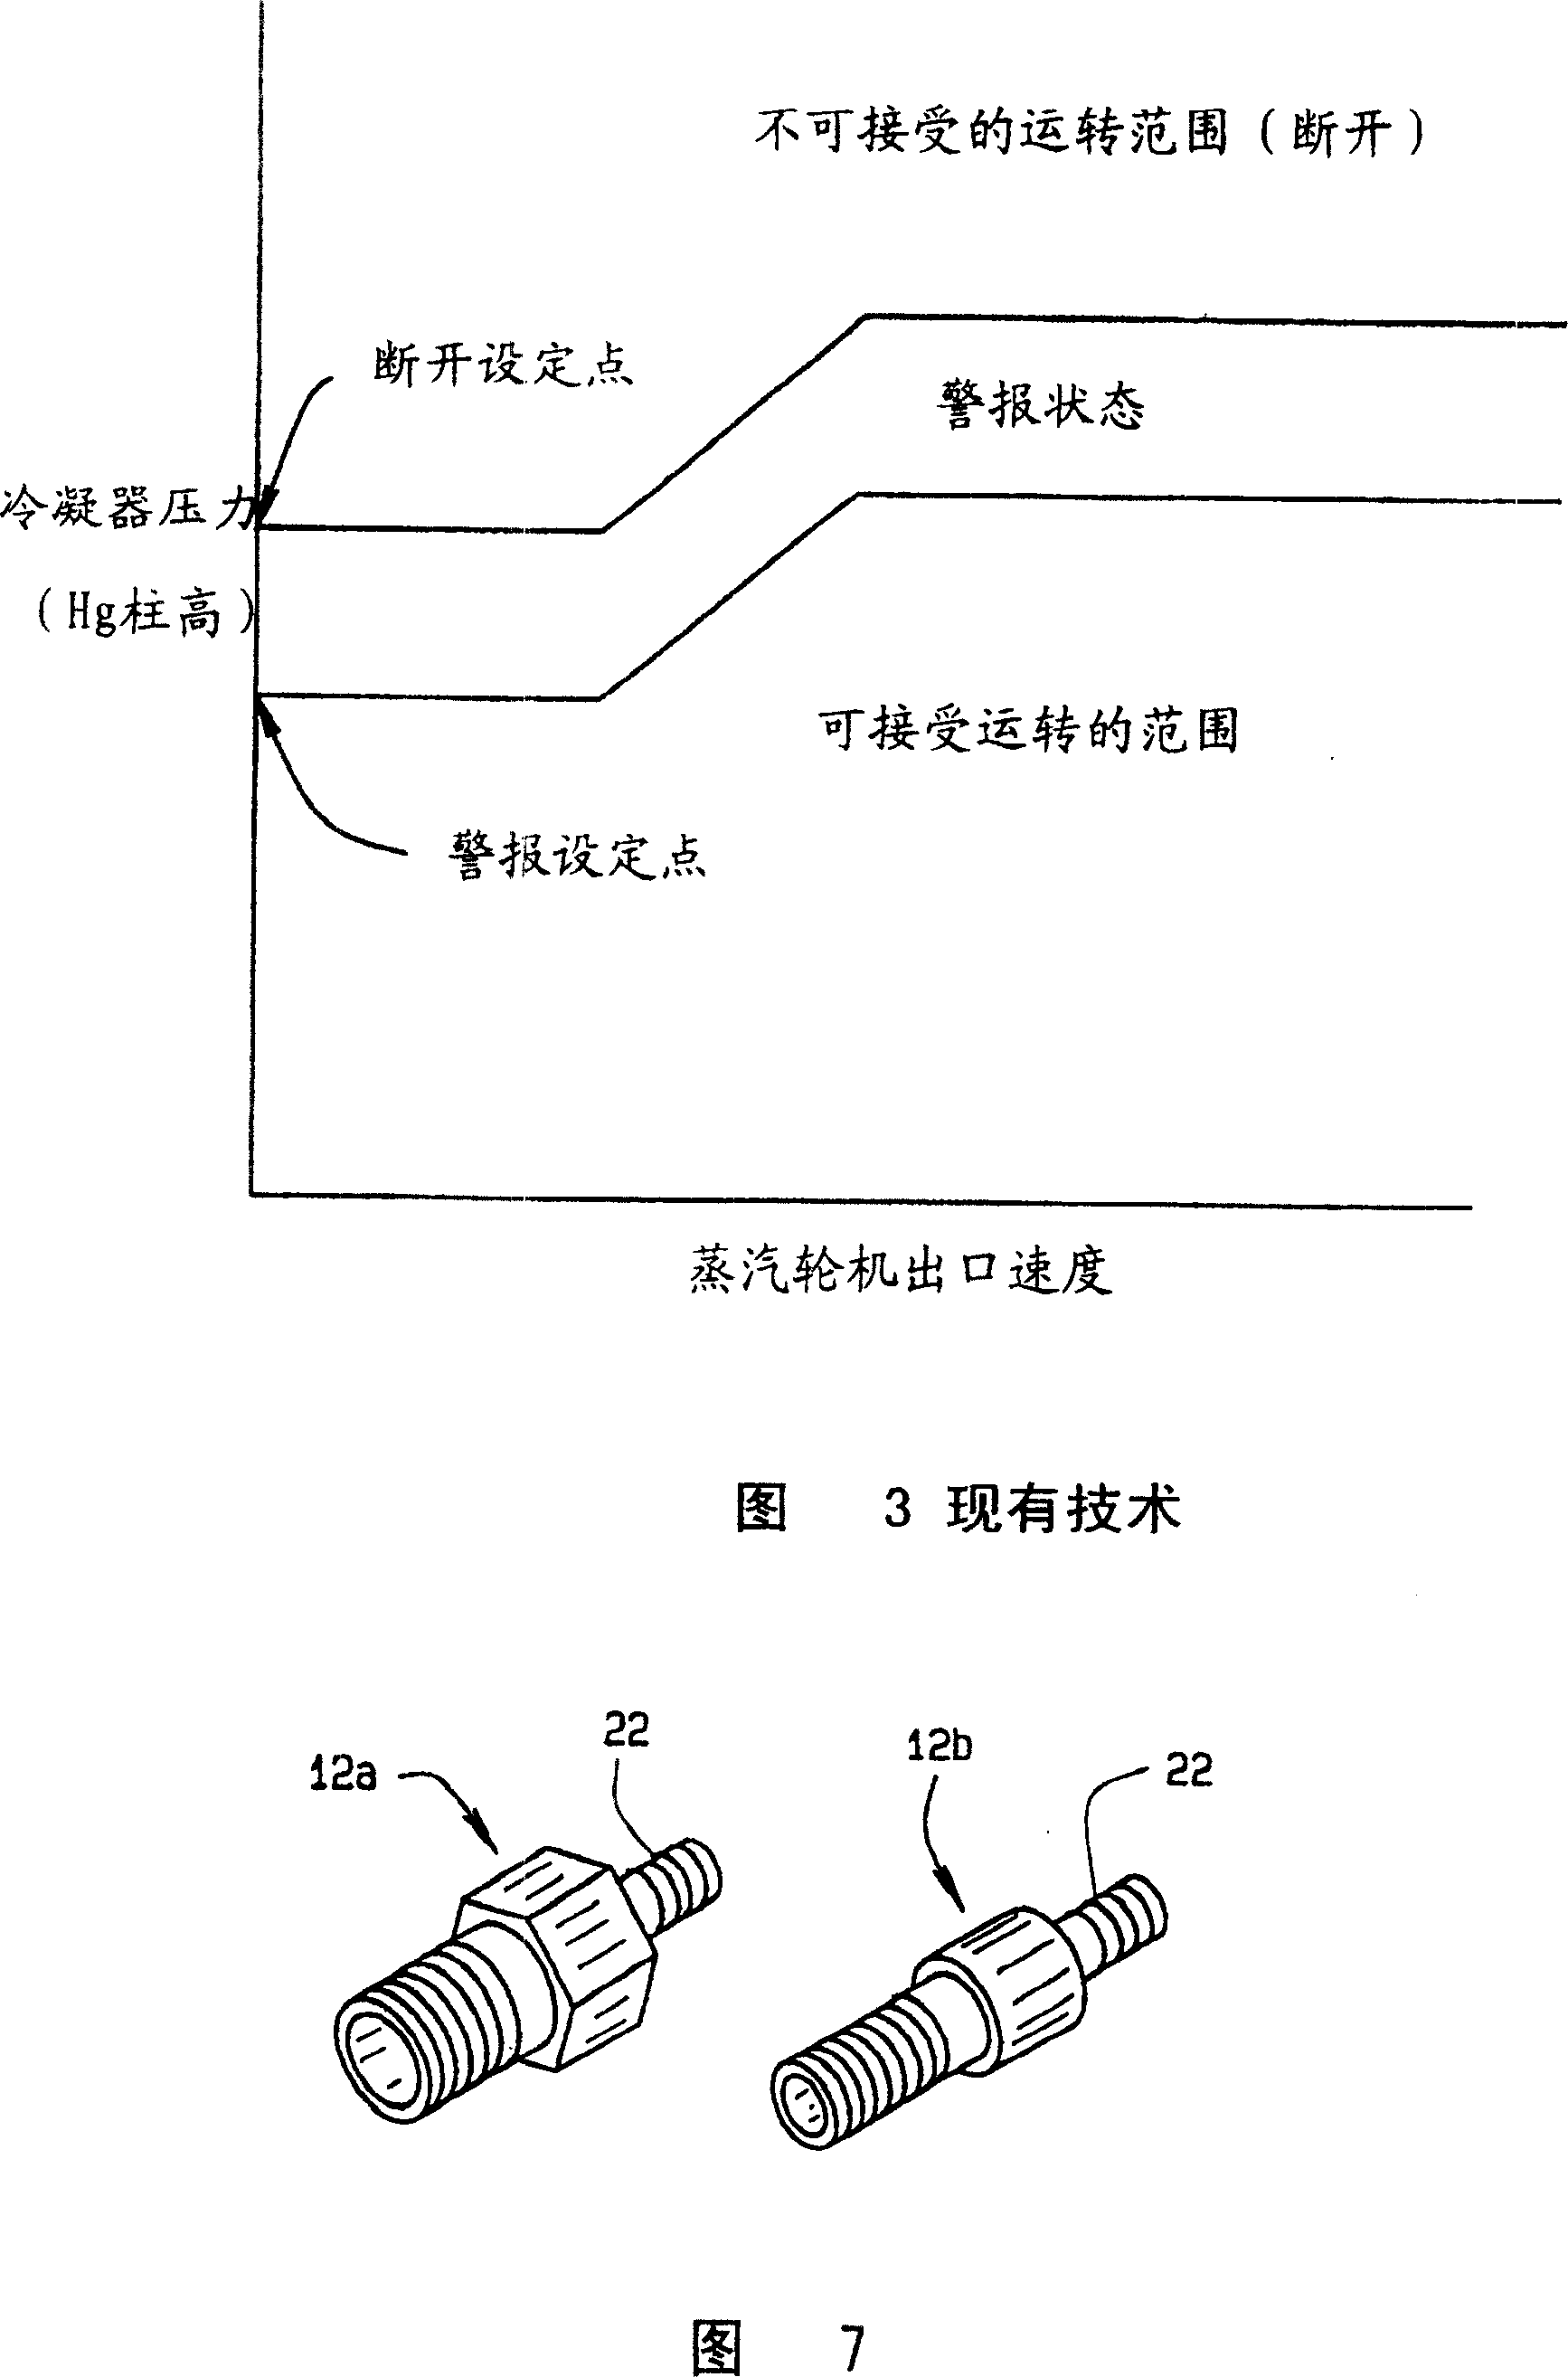 System and method for steam turbine backpressure control using dynamic pressure sensors